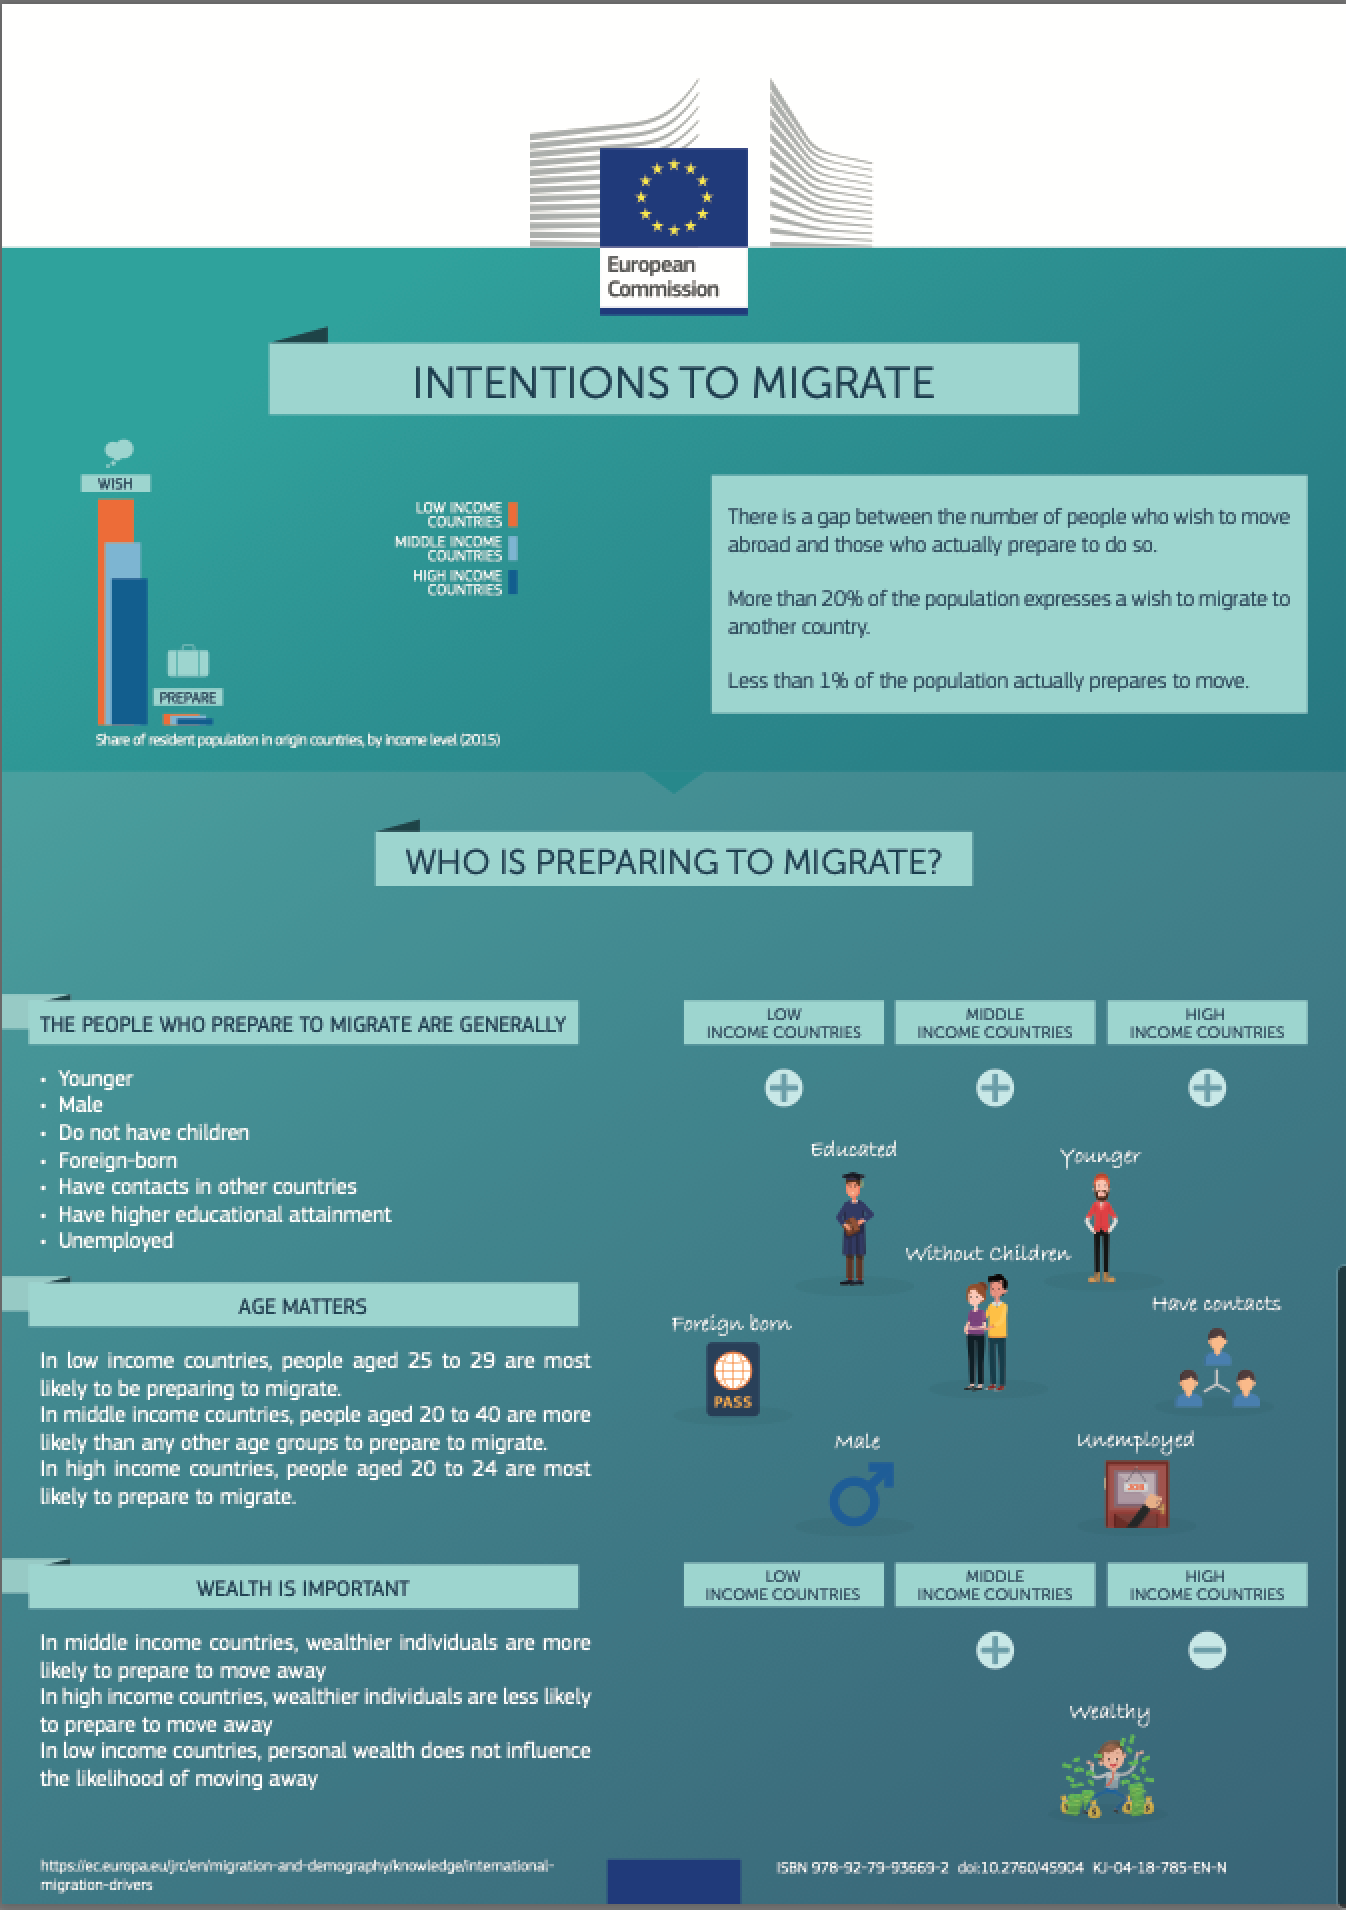 International Migration Drivers - intentions to migrate